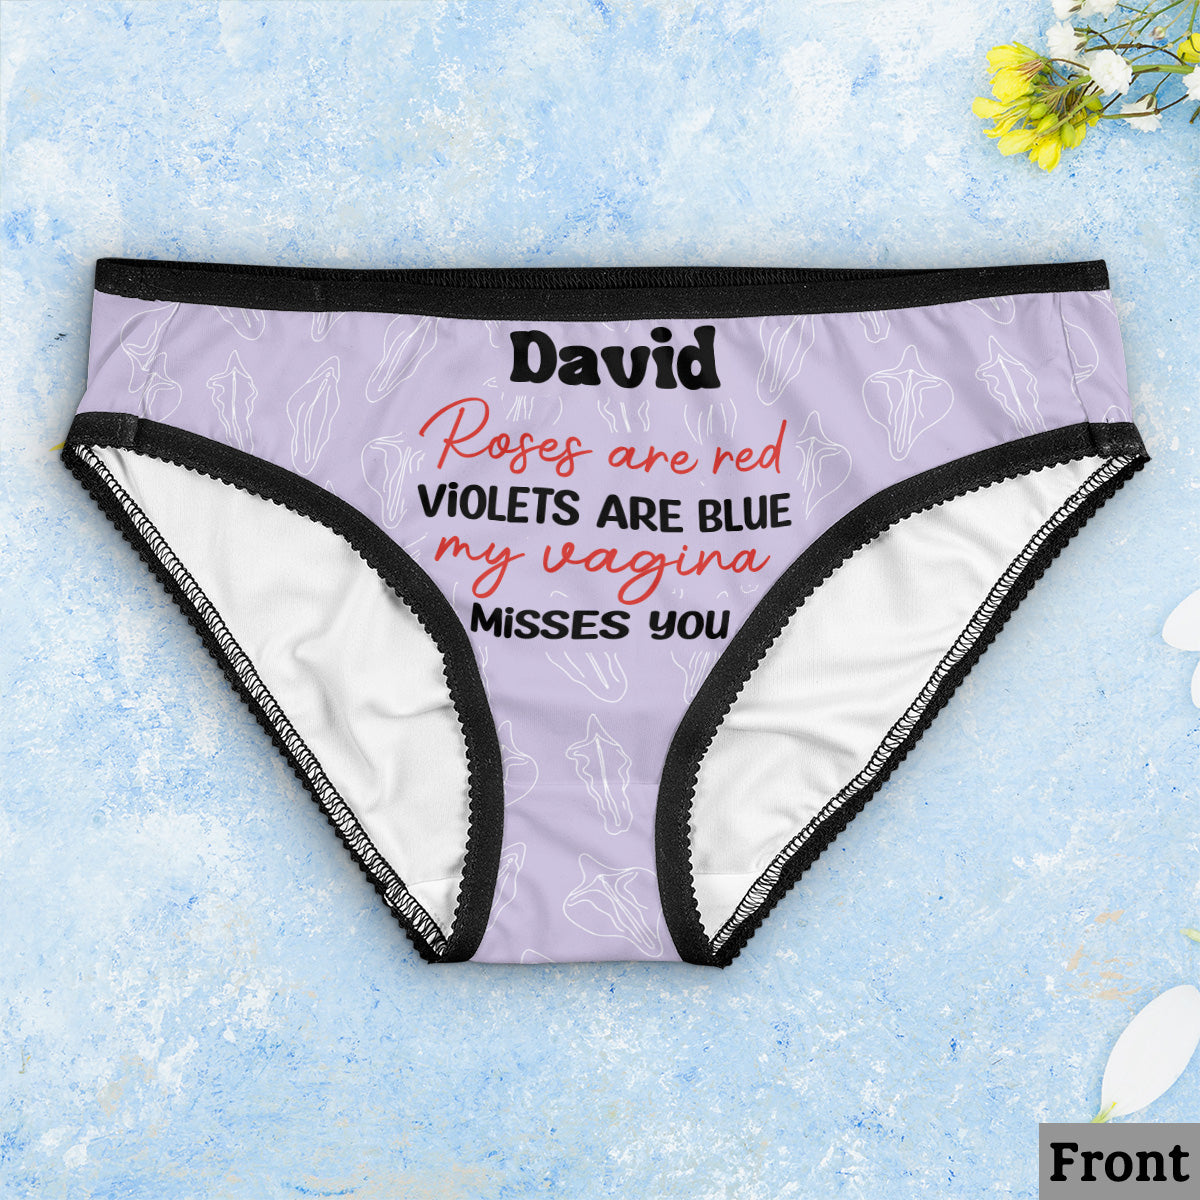 Custom Face Couple Underwear You Belong to Me Personalized